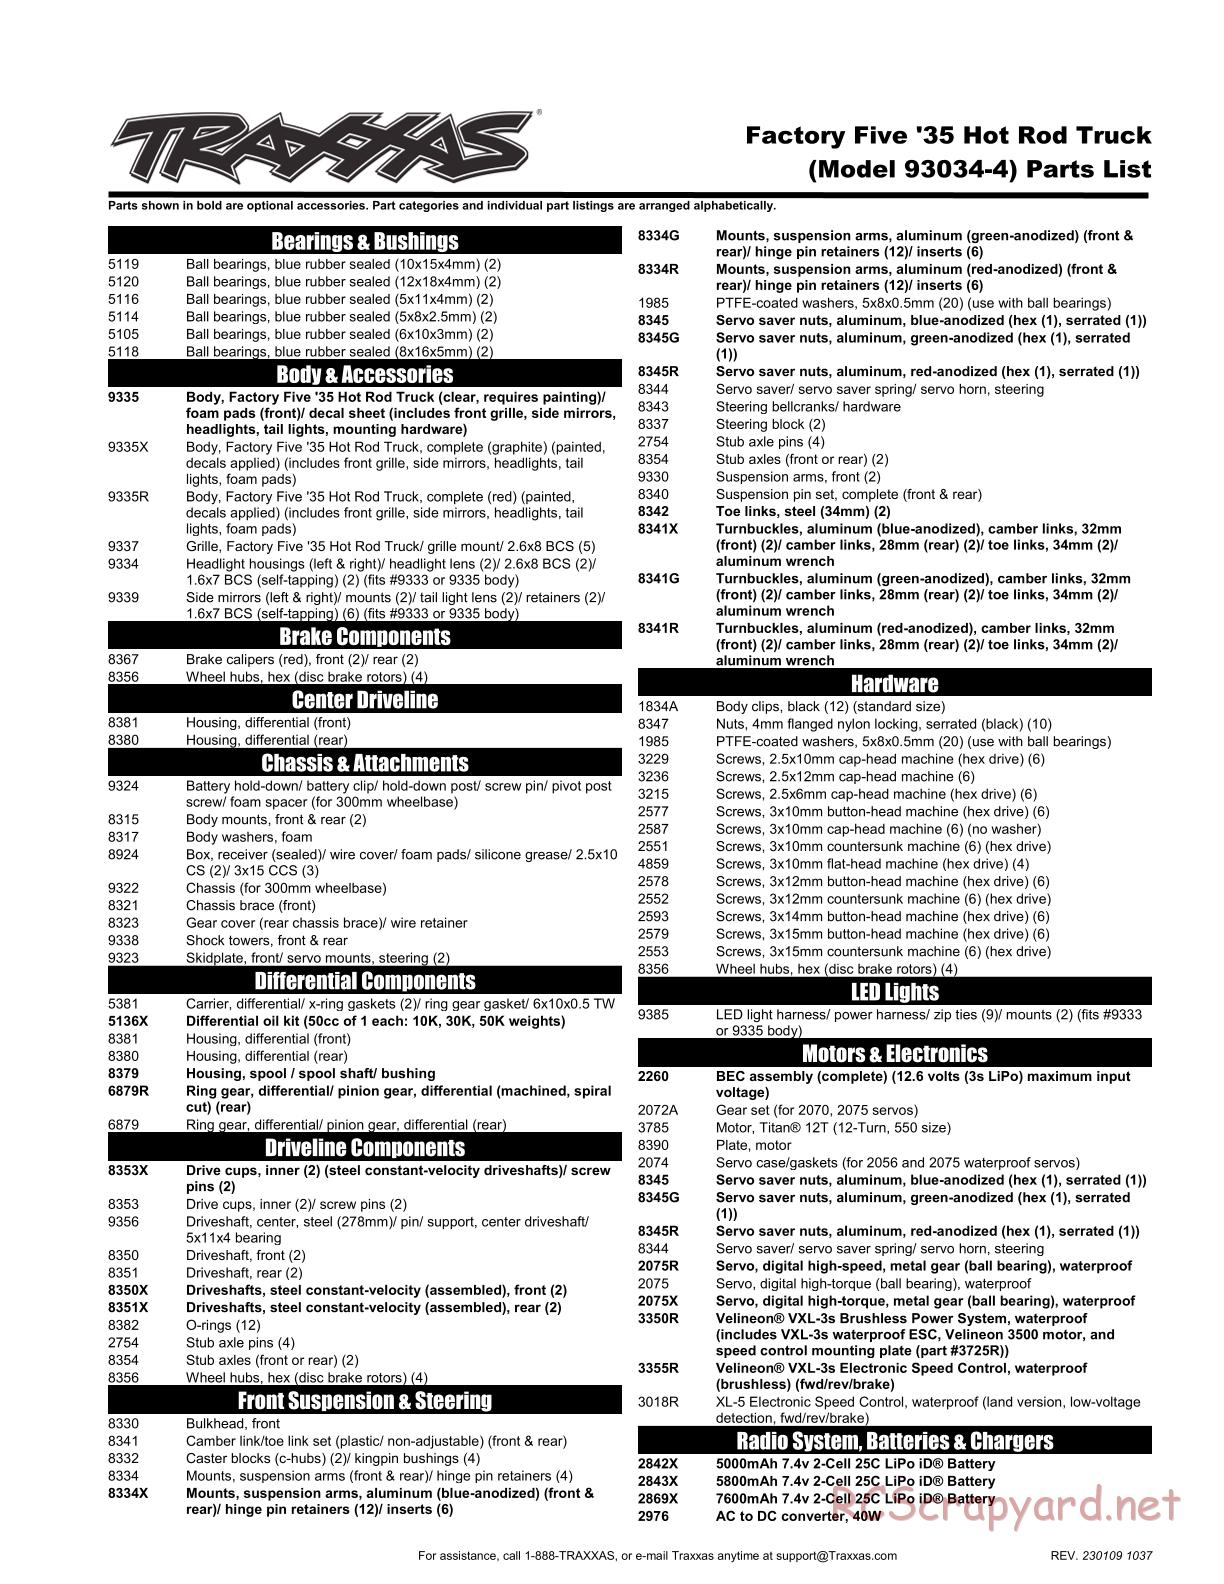 Traxxas - Hot Rod 1935 Truck (2021) - Parts List - Page 1